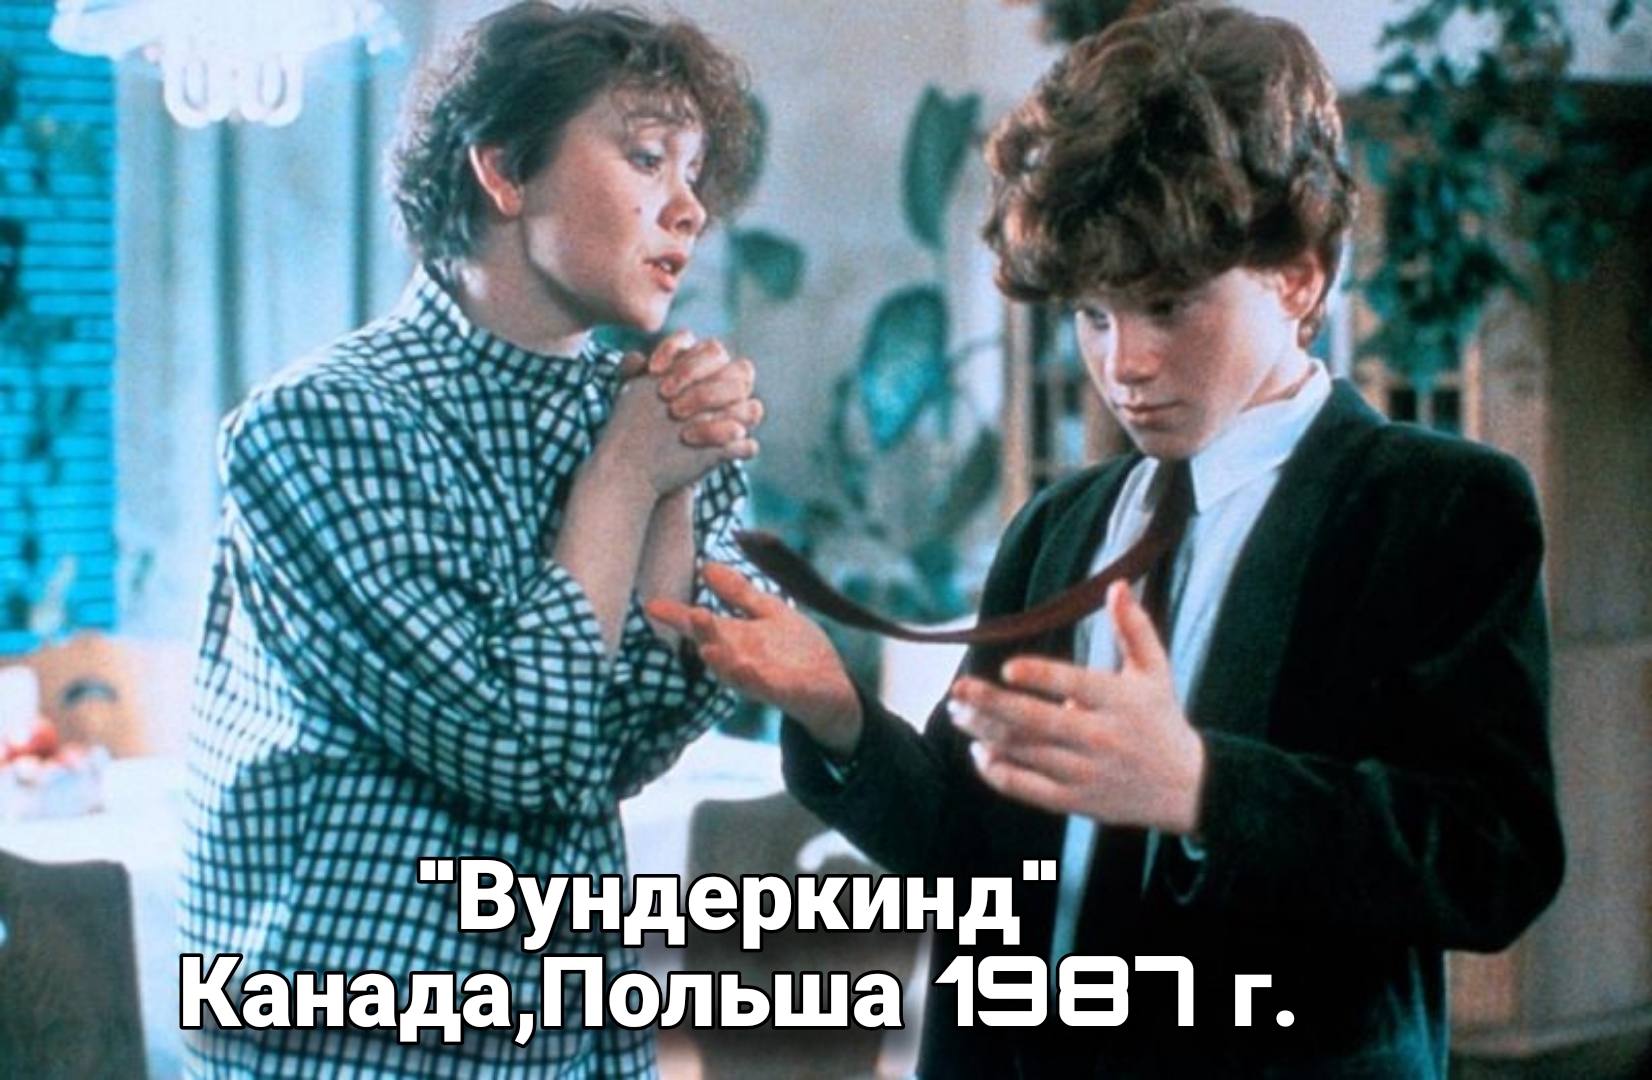 Some foreign children's films in our country in the 80s and the first half of the 90s - Children's fairy tales, Films of the 90s, Nostalgia, Childhood in the USSR, Longpost, Picture with text